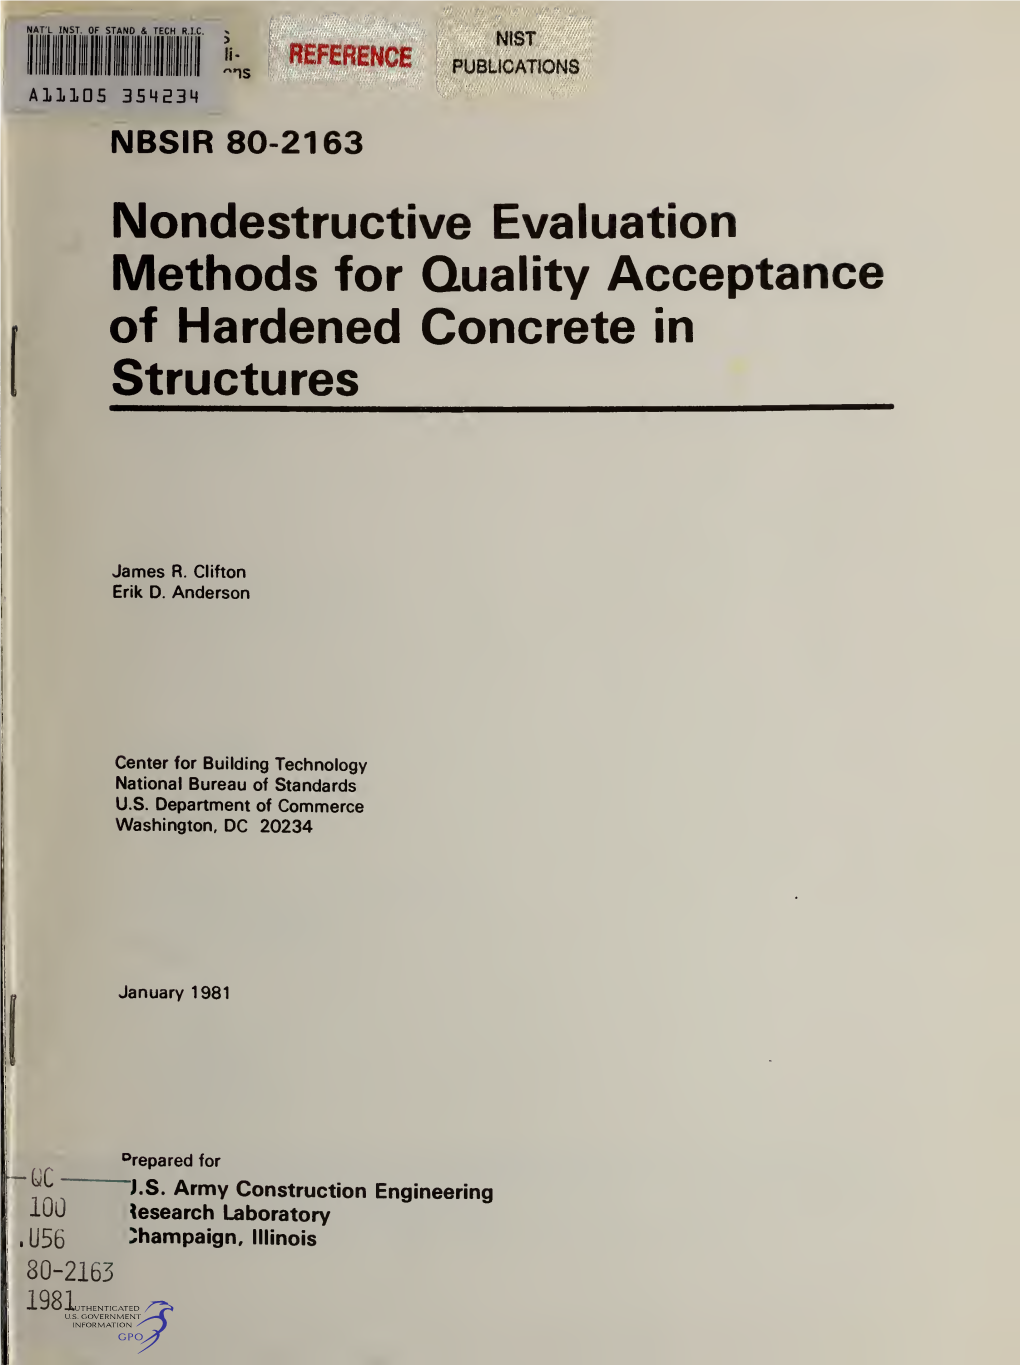 Nondestructive Evaluation Methods for Quality Acceptance of Hardened Concrete in Structures